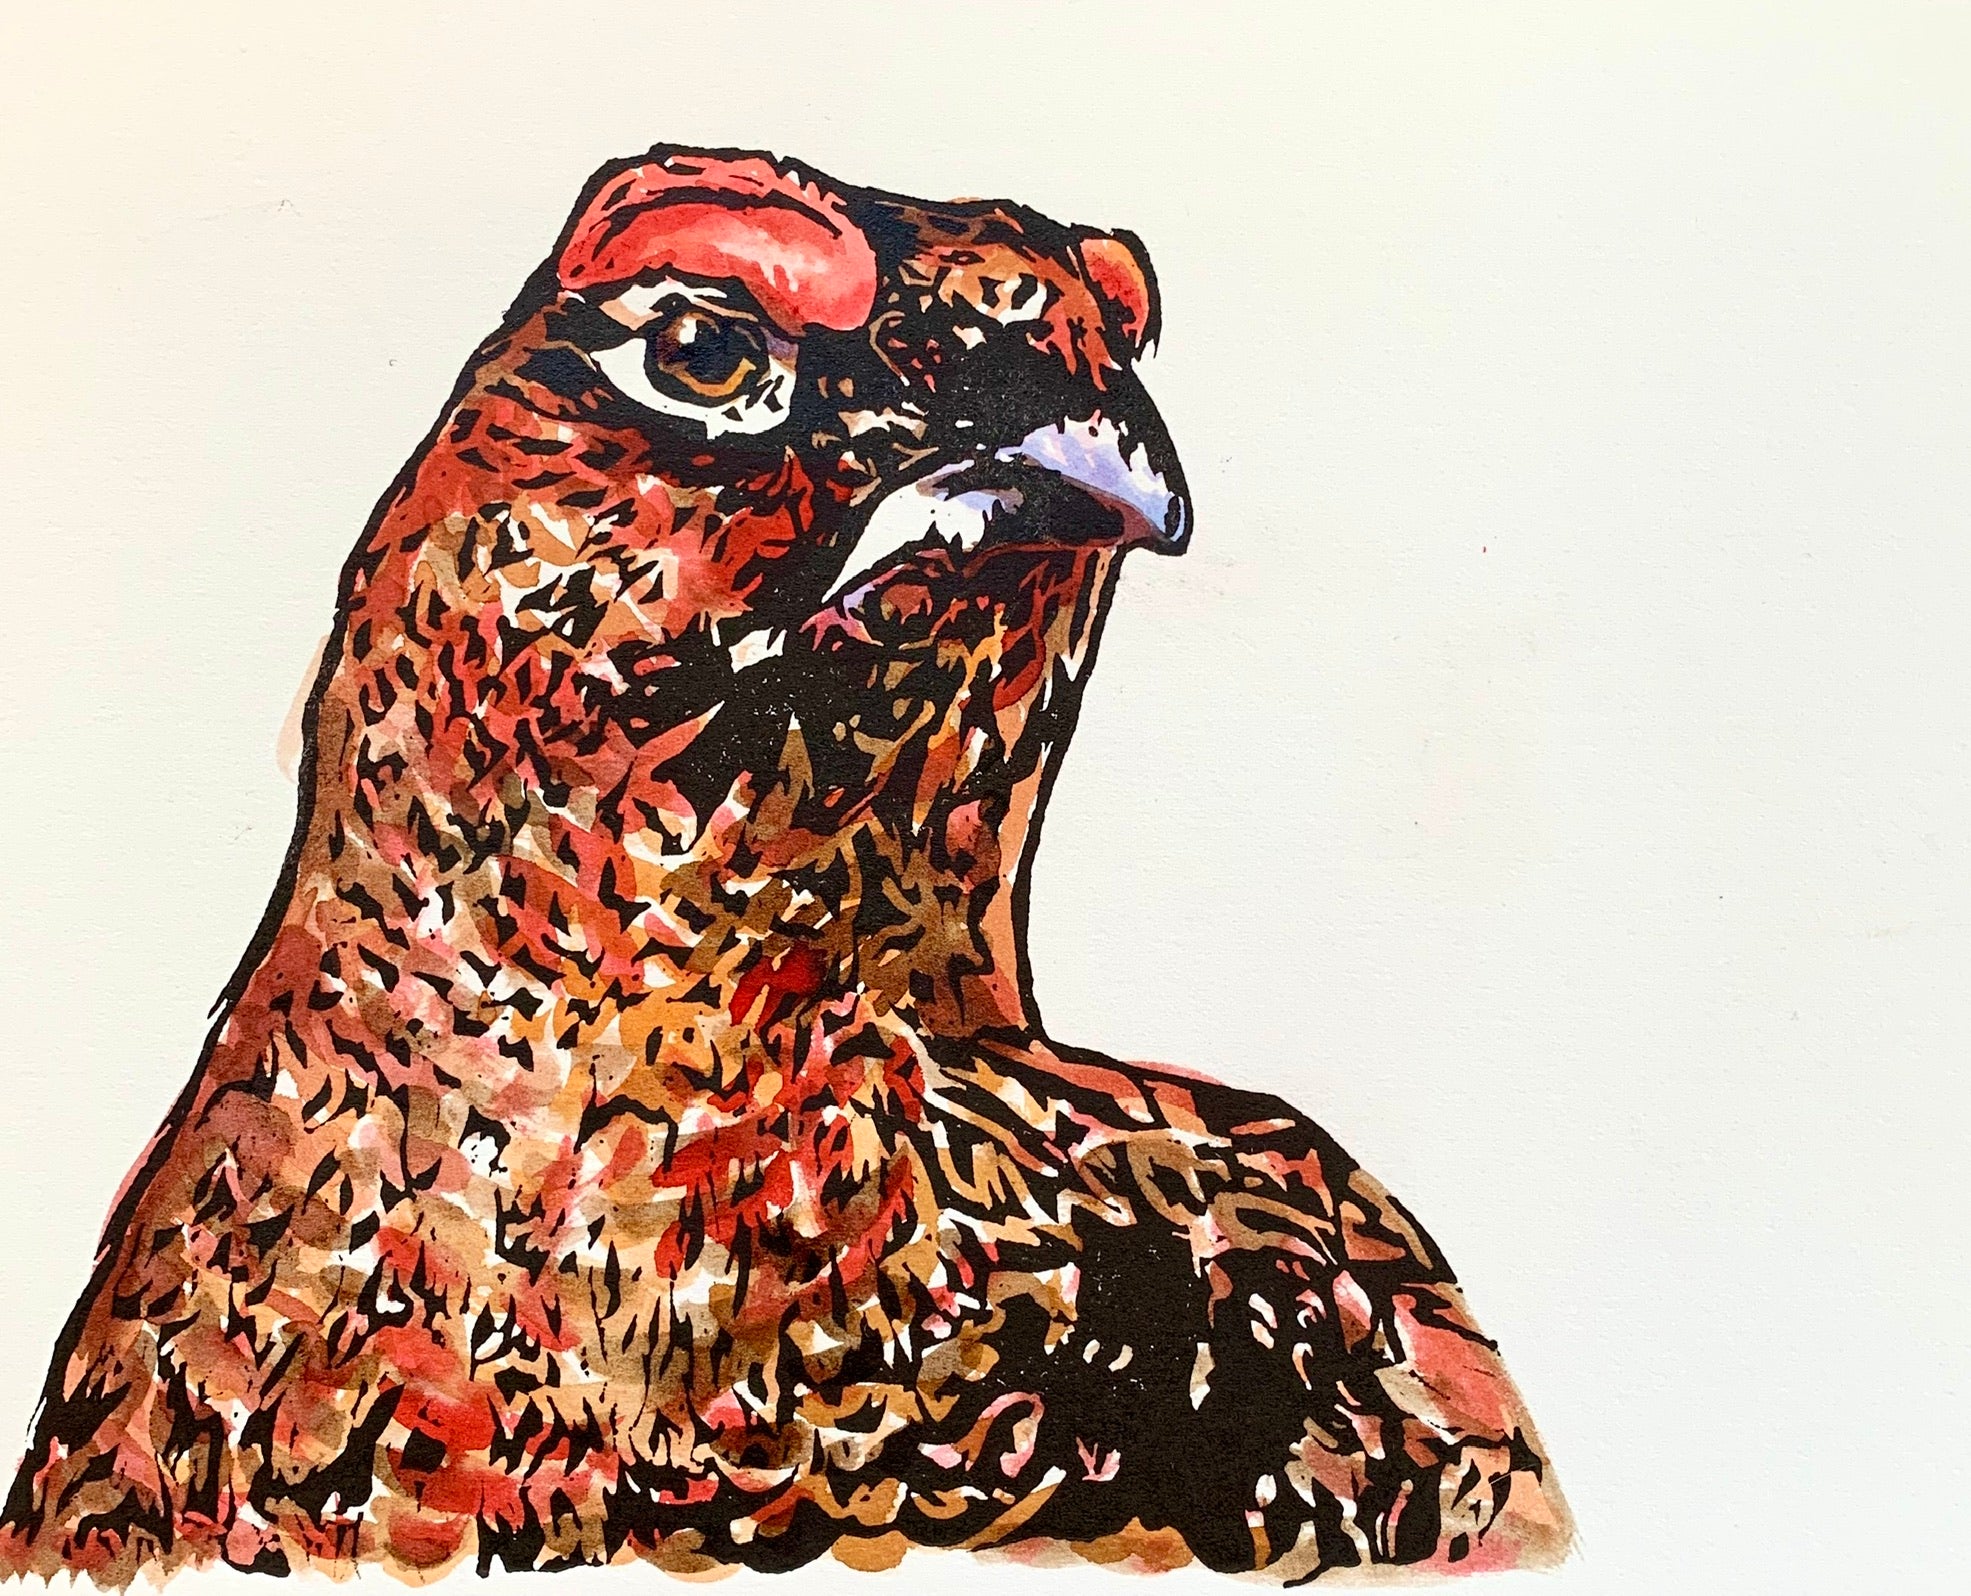 'Grouse' - Original Hand Printed, Hand Coloured Linocut by Sarah Cemmick